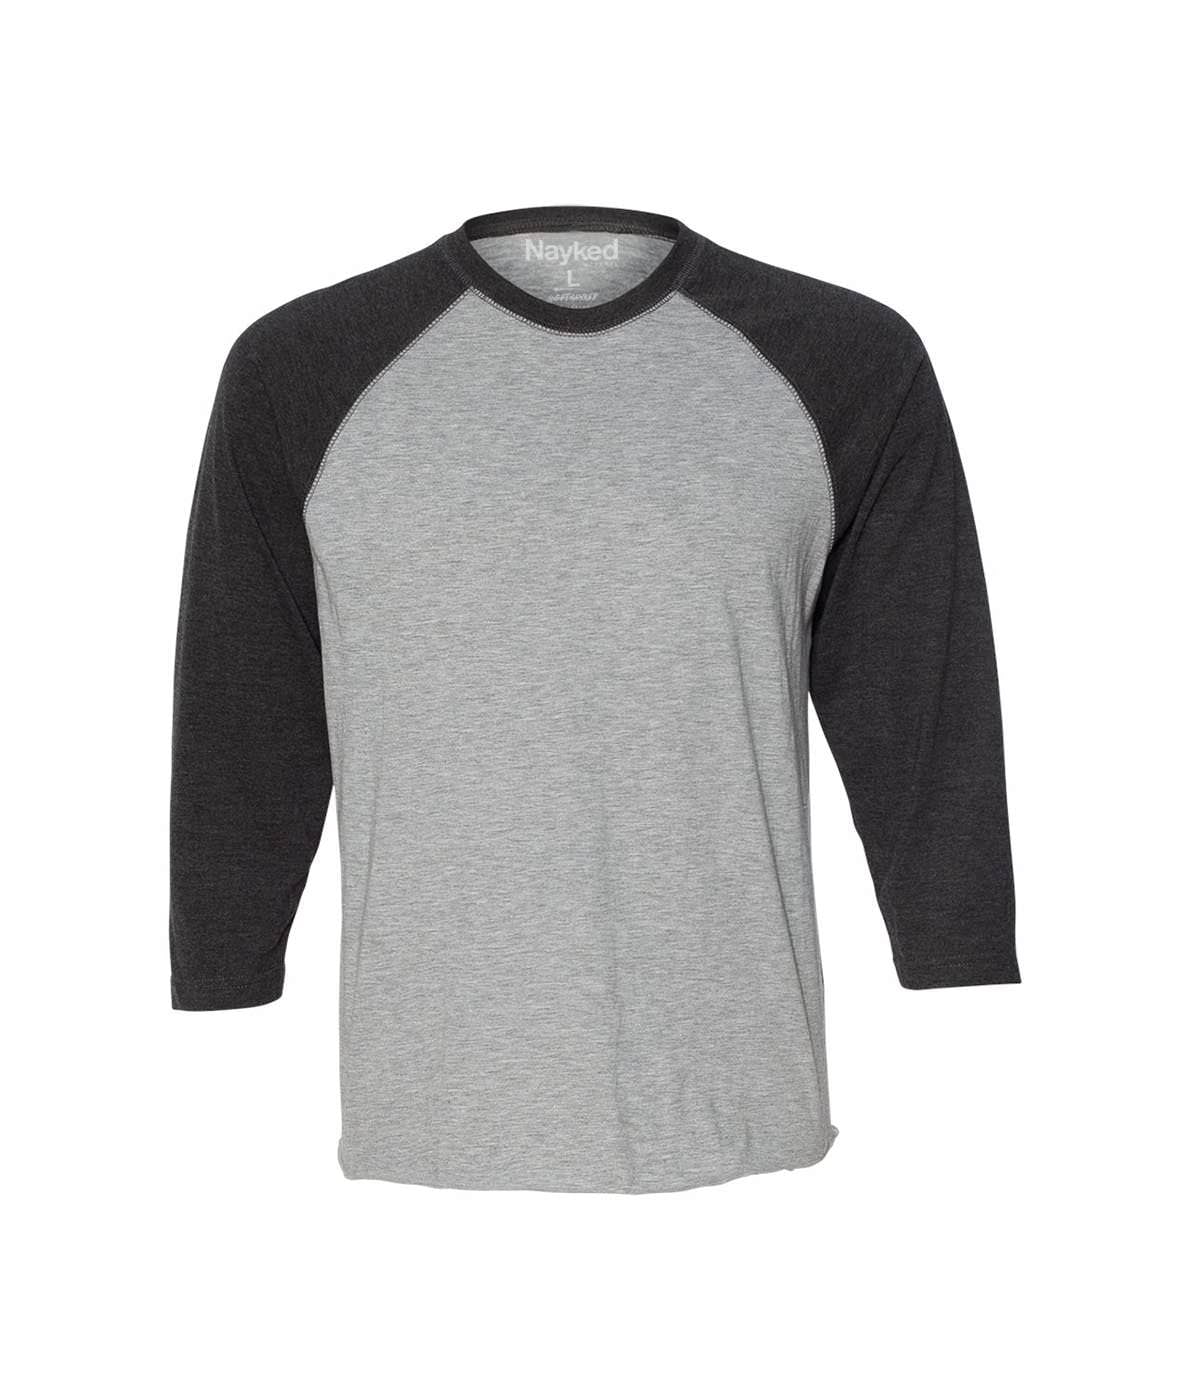 Nayked - Men's Ridiculously Soft Midweight Heathered Baseball Tee ...